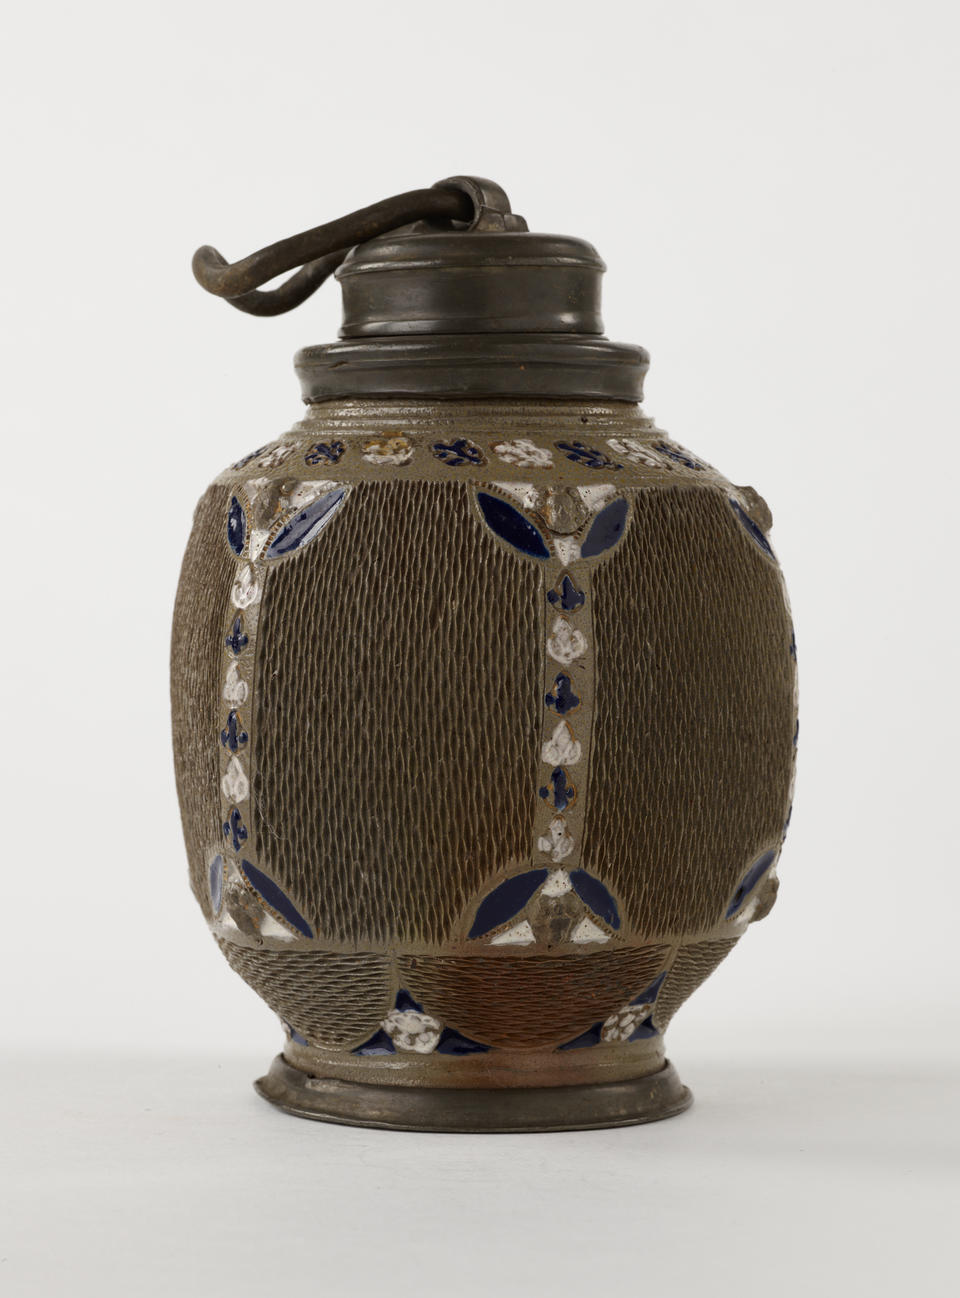 A ceramic and salt glaze flask that is dark gray, blue, and white. The body is angular and has textured sections whereas the foot and top are rounded. 